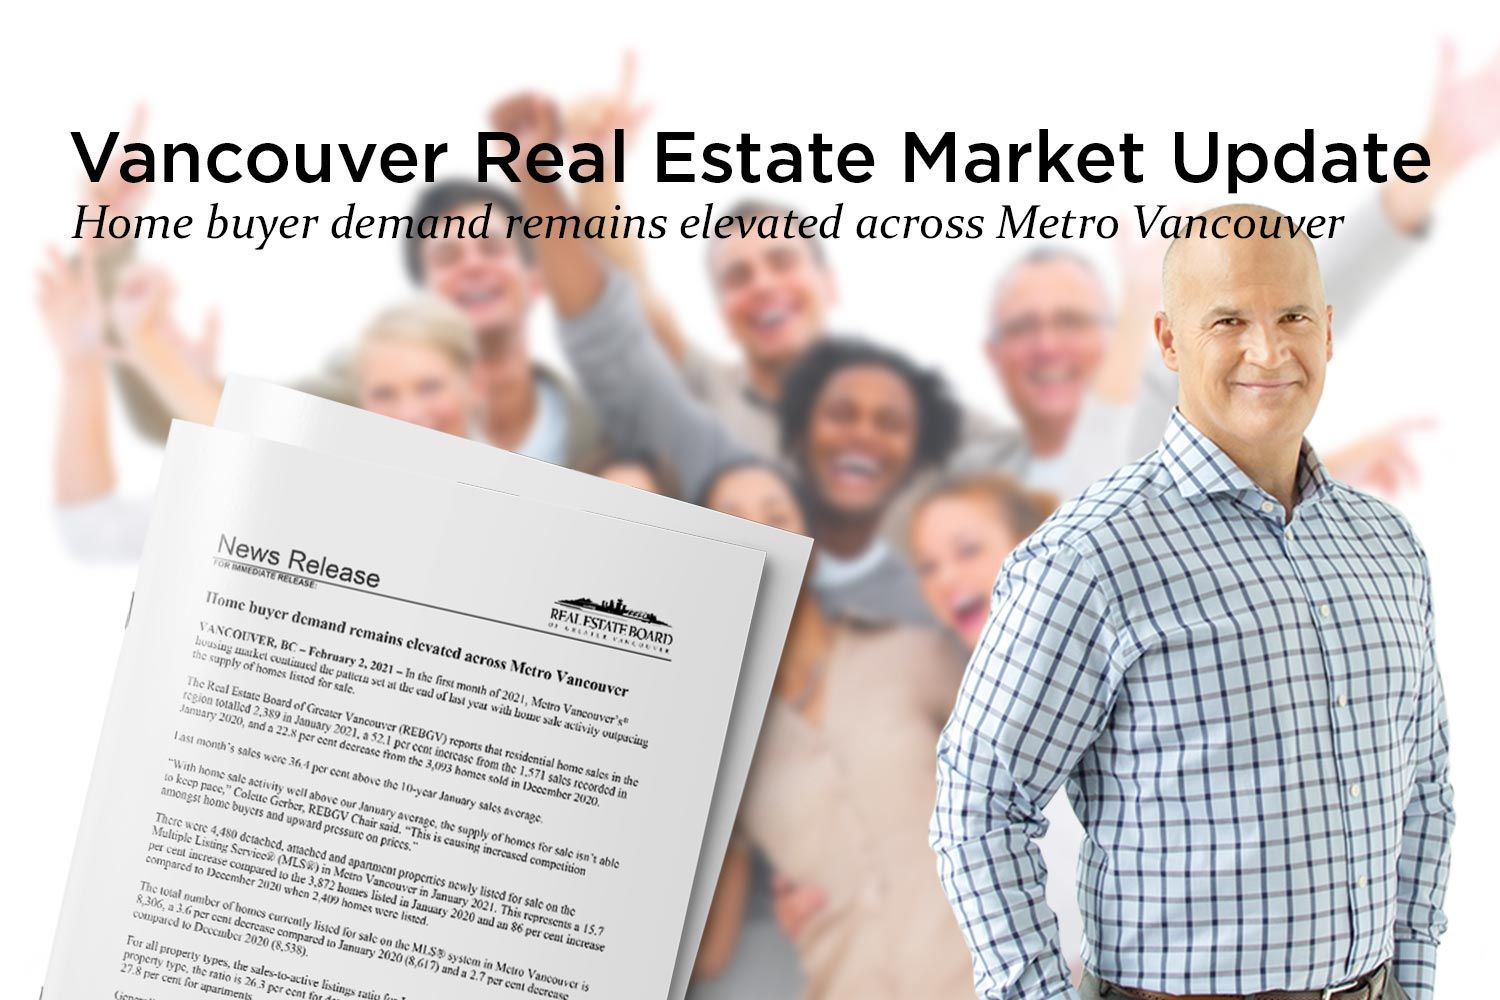 Home buyer demand remains elevated across Metro Vancouver